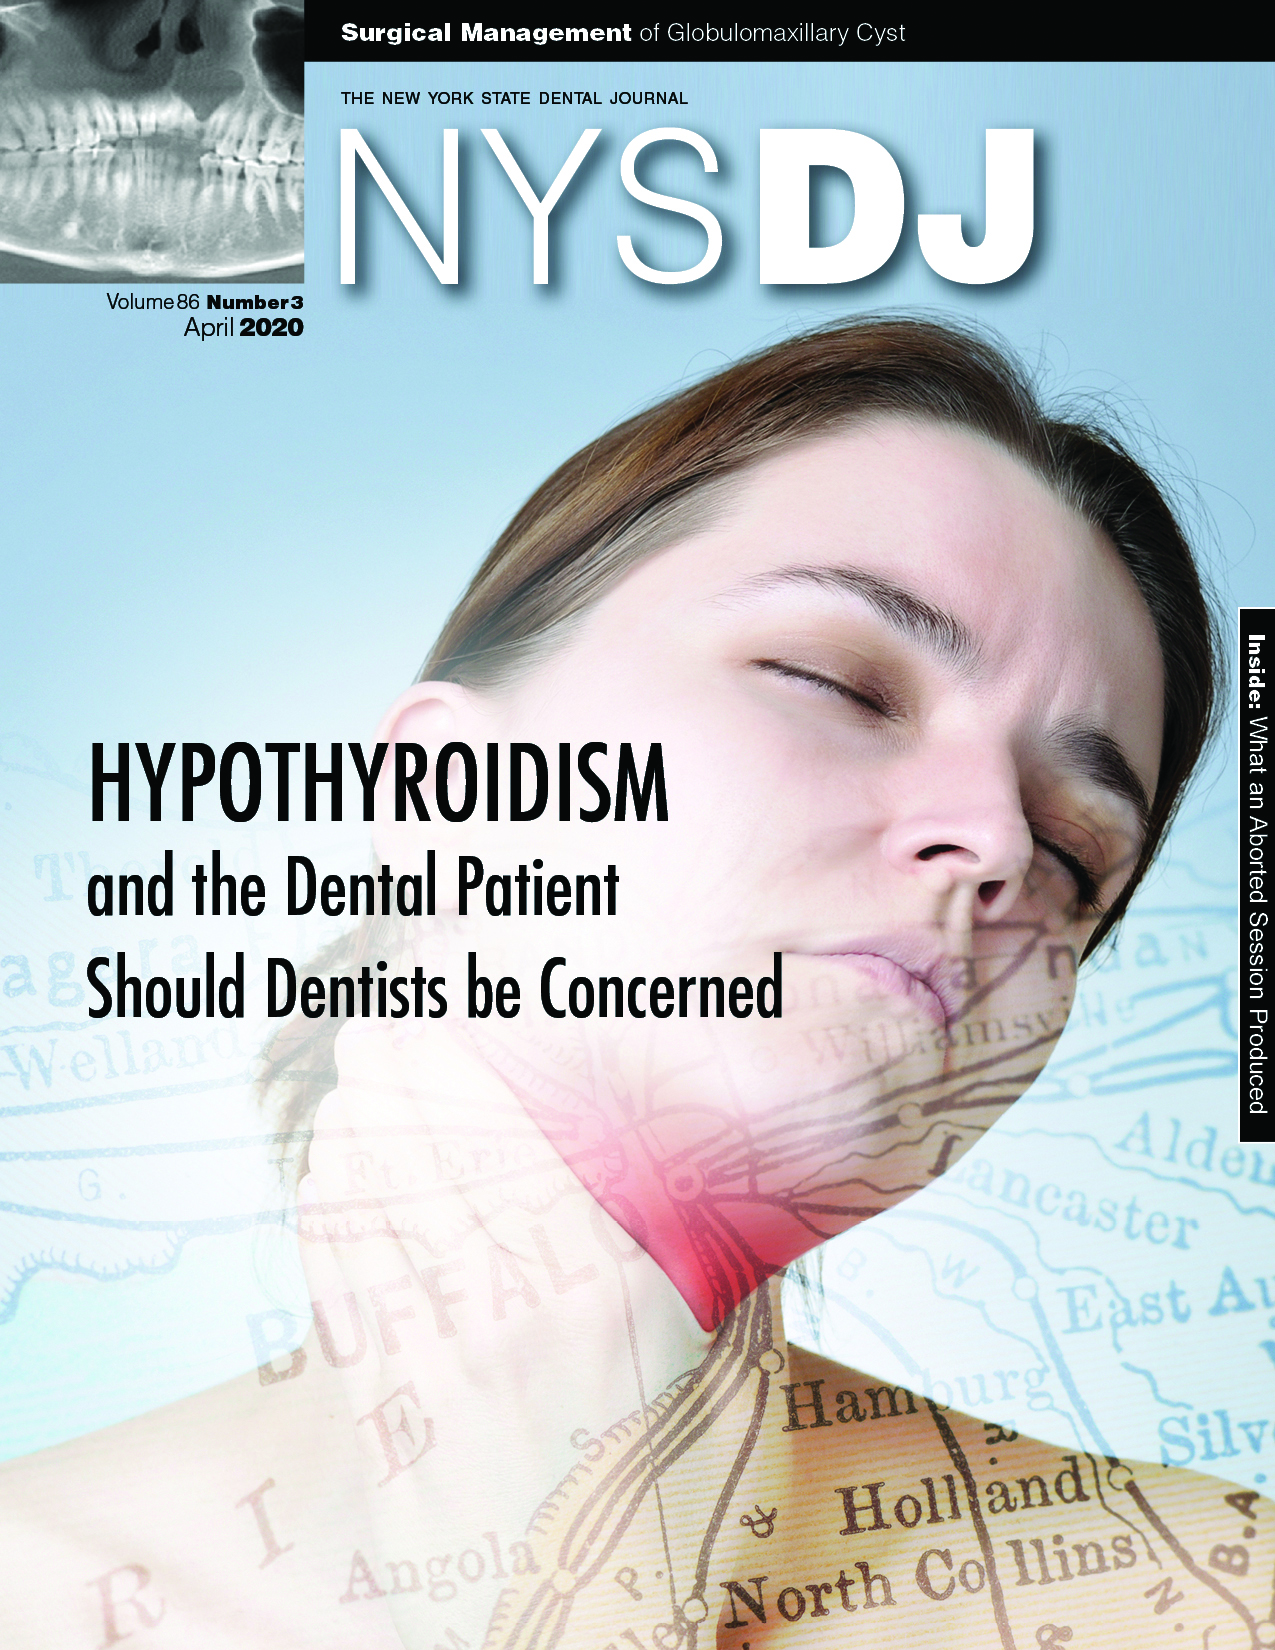 Cover of the NYSDJ with a photo of a person looking pained and grabbing their inflamed throat. A map is overlaid.